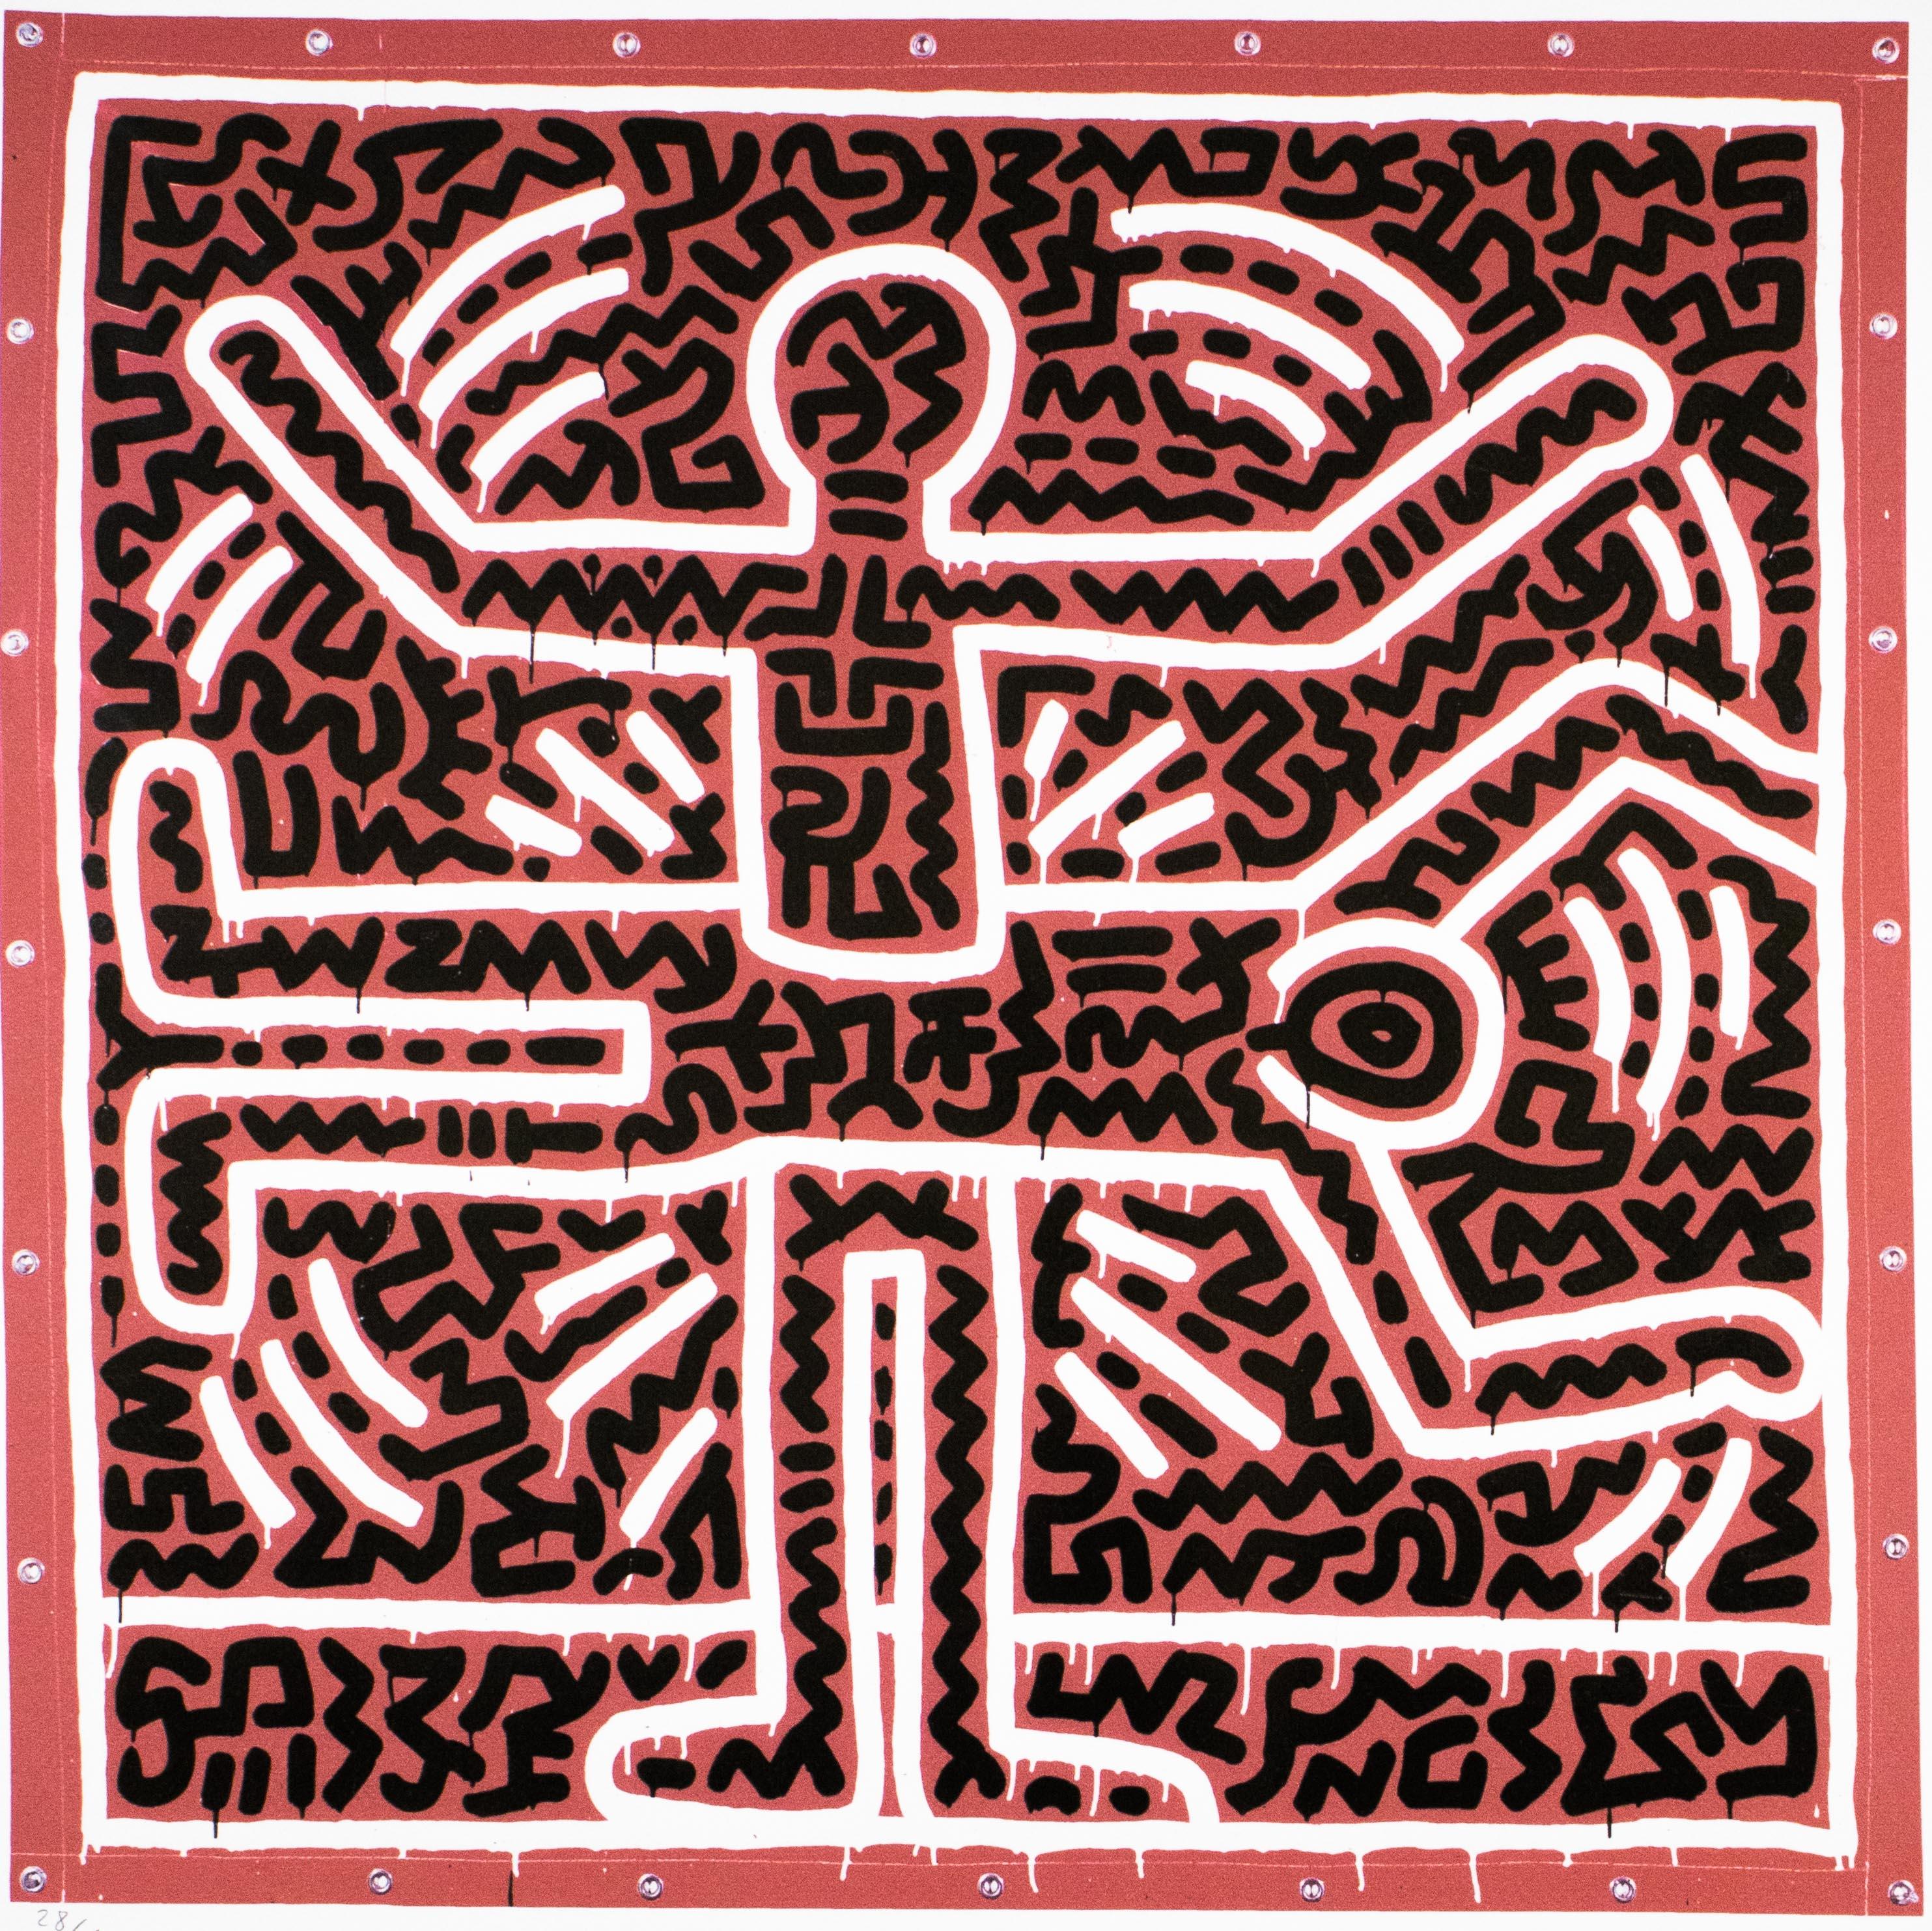 KEITH HARING - Untitled
Limited 1990s edition by the Keith Haring Foundation, Inc.

Only 150 copies total (here 28/150).
Lithograph on thick cardboard.

Signed in plate.
Edition hand numbered in pencil.
With Keith Haring Foundation blind stamp at